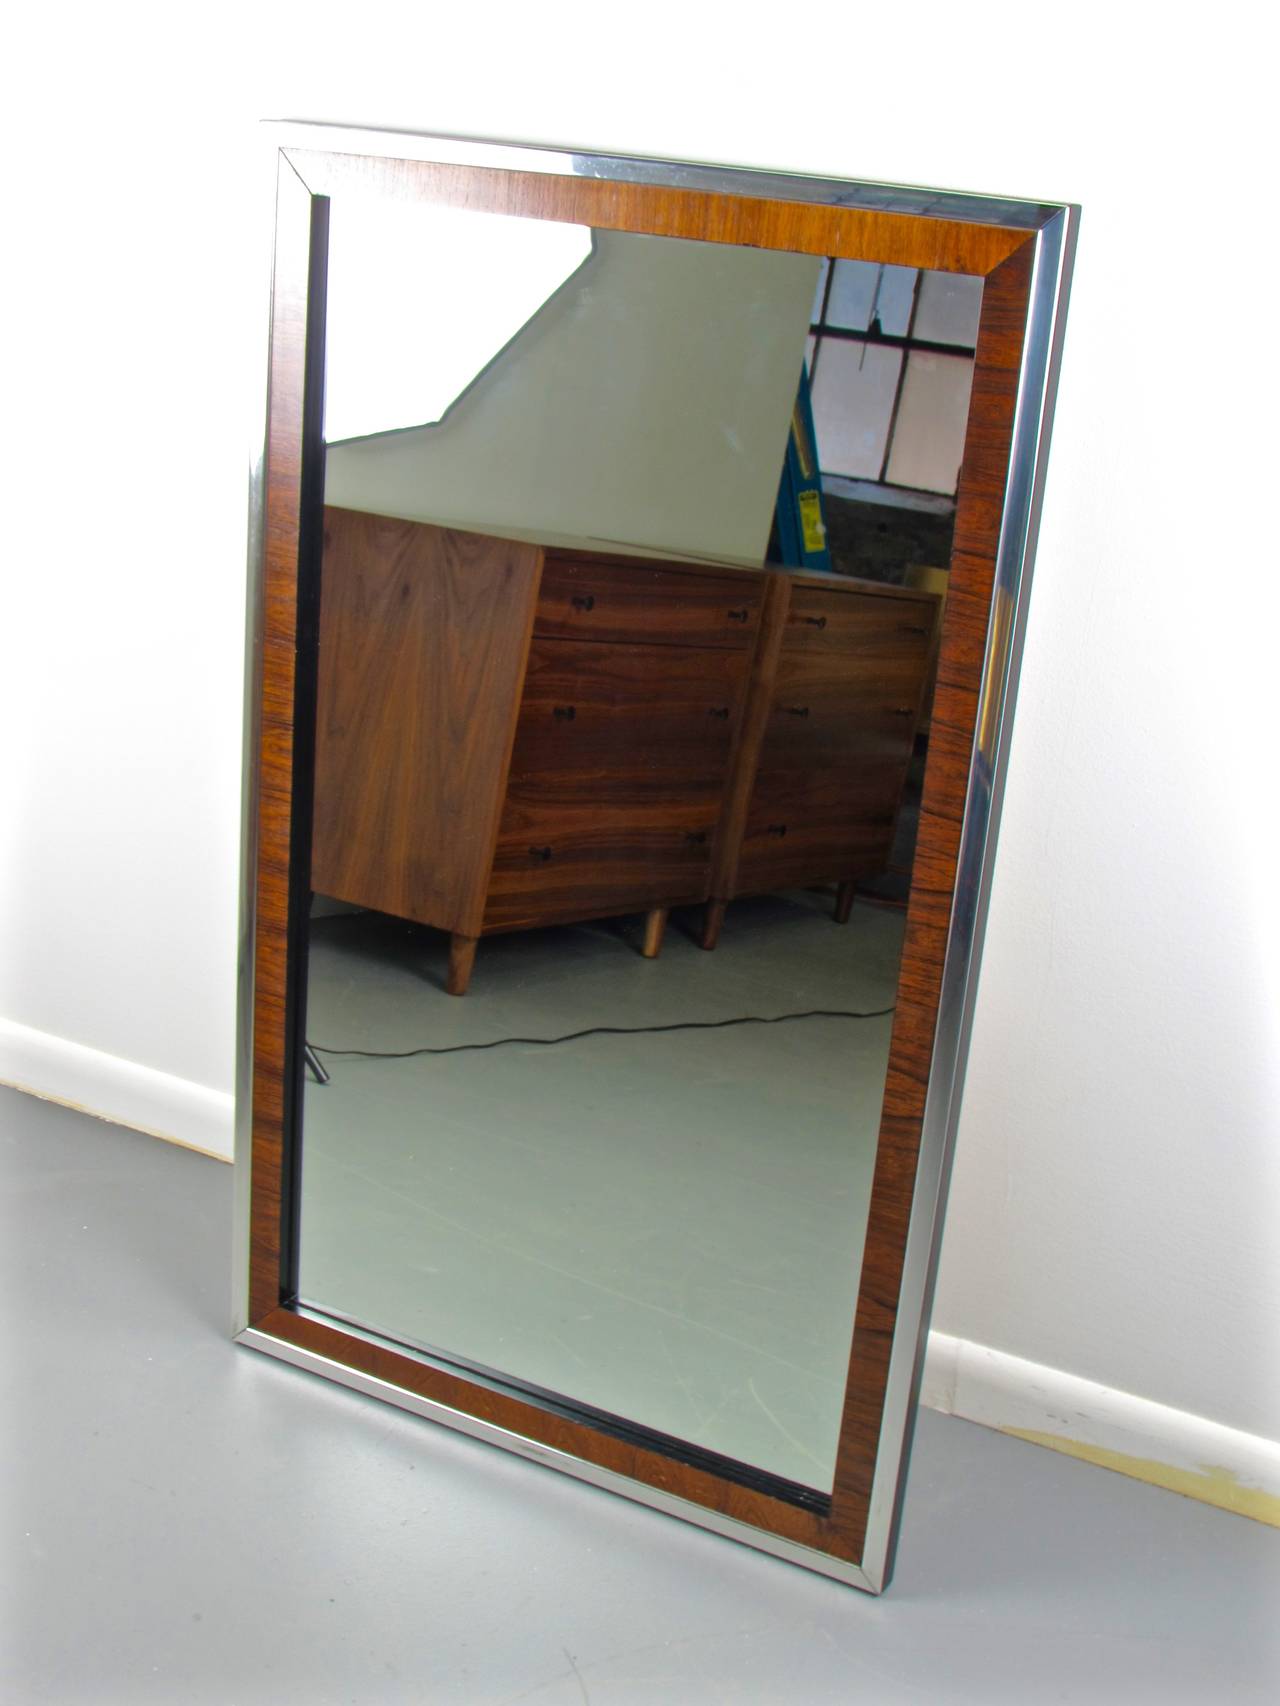 Large, striking Baughman style rosewood and chrome wall mirror by John Stuart, 1970s. Trimmed in chrome and rosewood with fantastic grain. Condition is excellent. 

We offer free regular deliveries to NYC and Philadelphia area. Delivery to DC, MD,